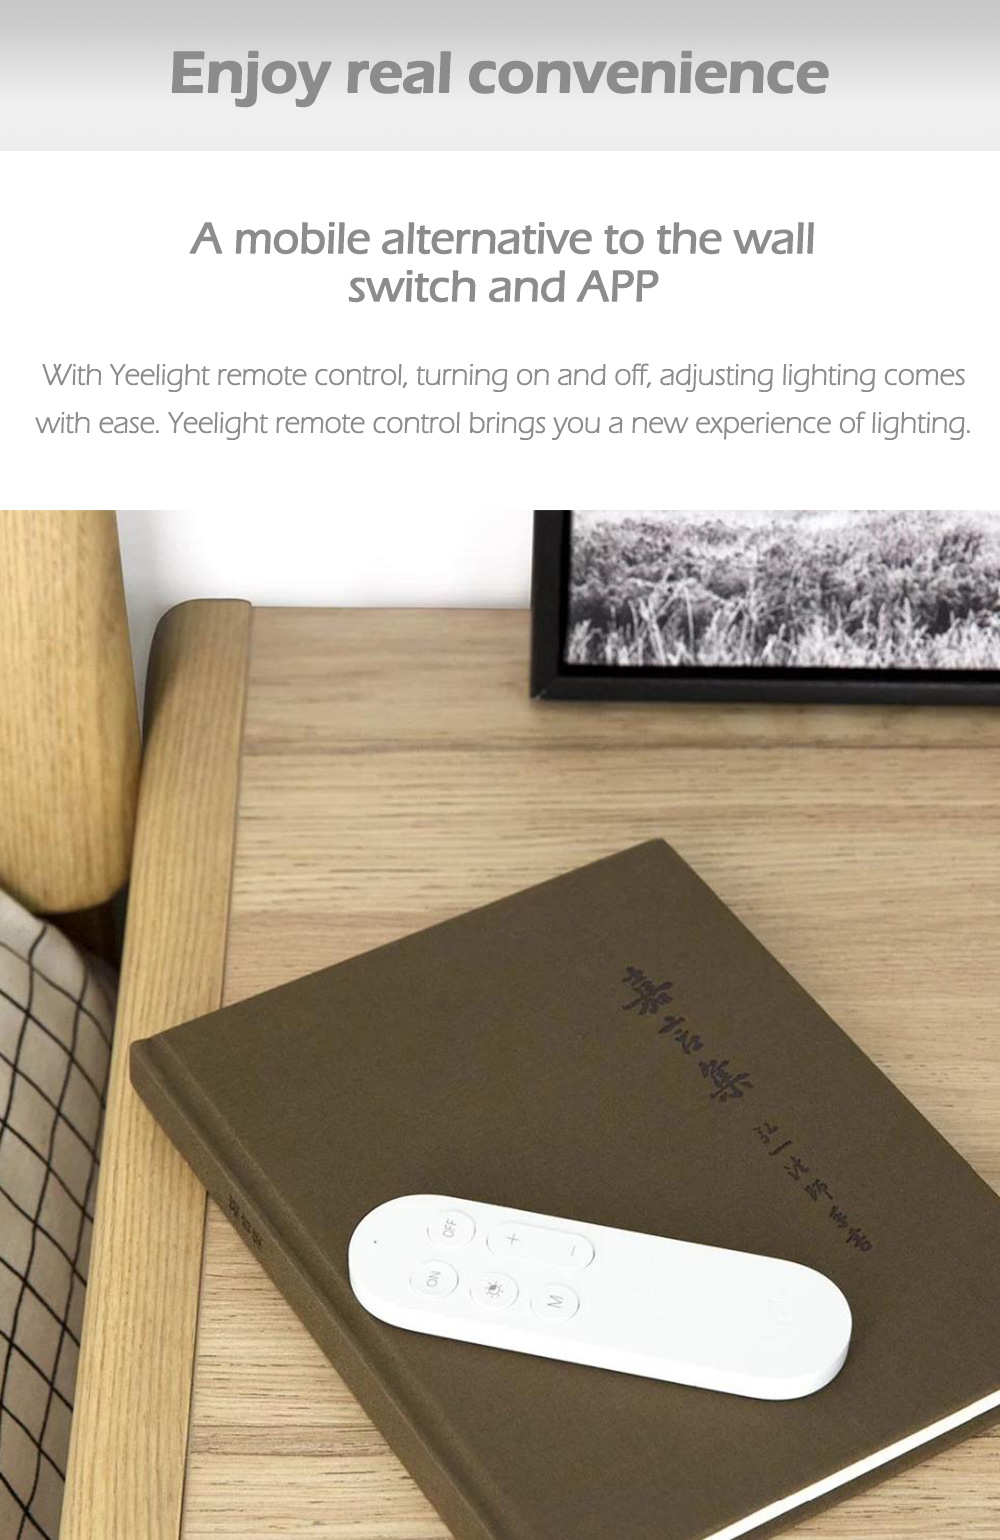 Yeelight Remote Control Transmitter for Smart LED Ceiling Light Lamp ( Xiaomi Ecosystem Product ) - White